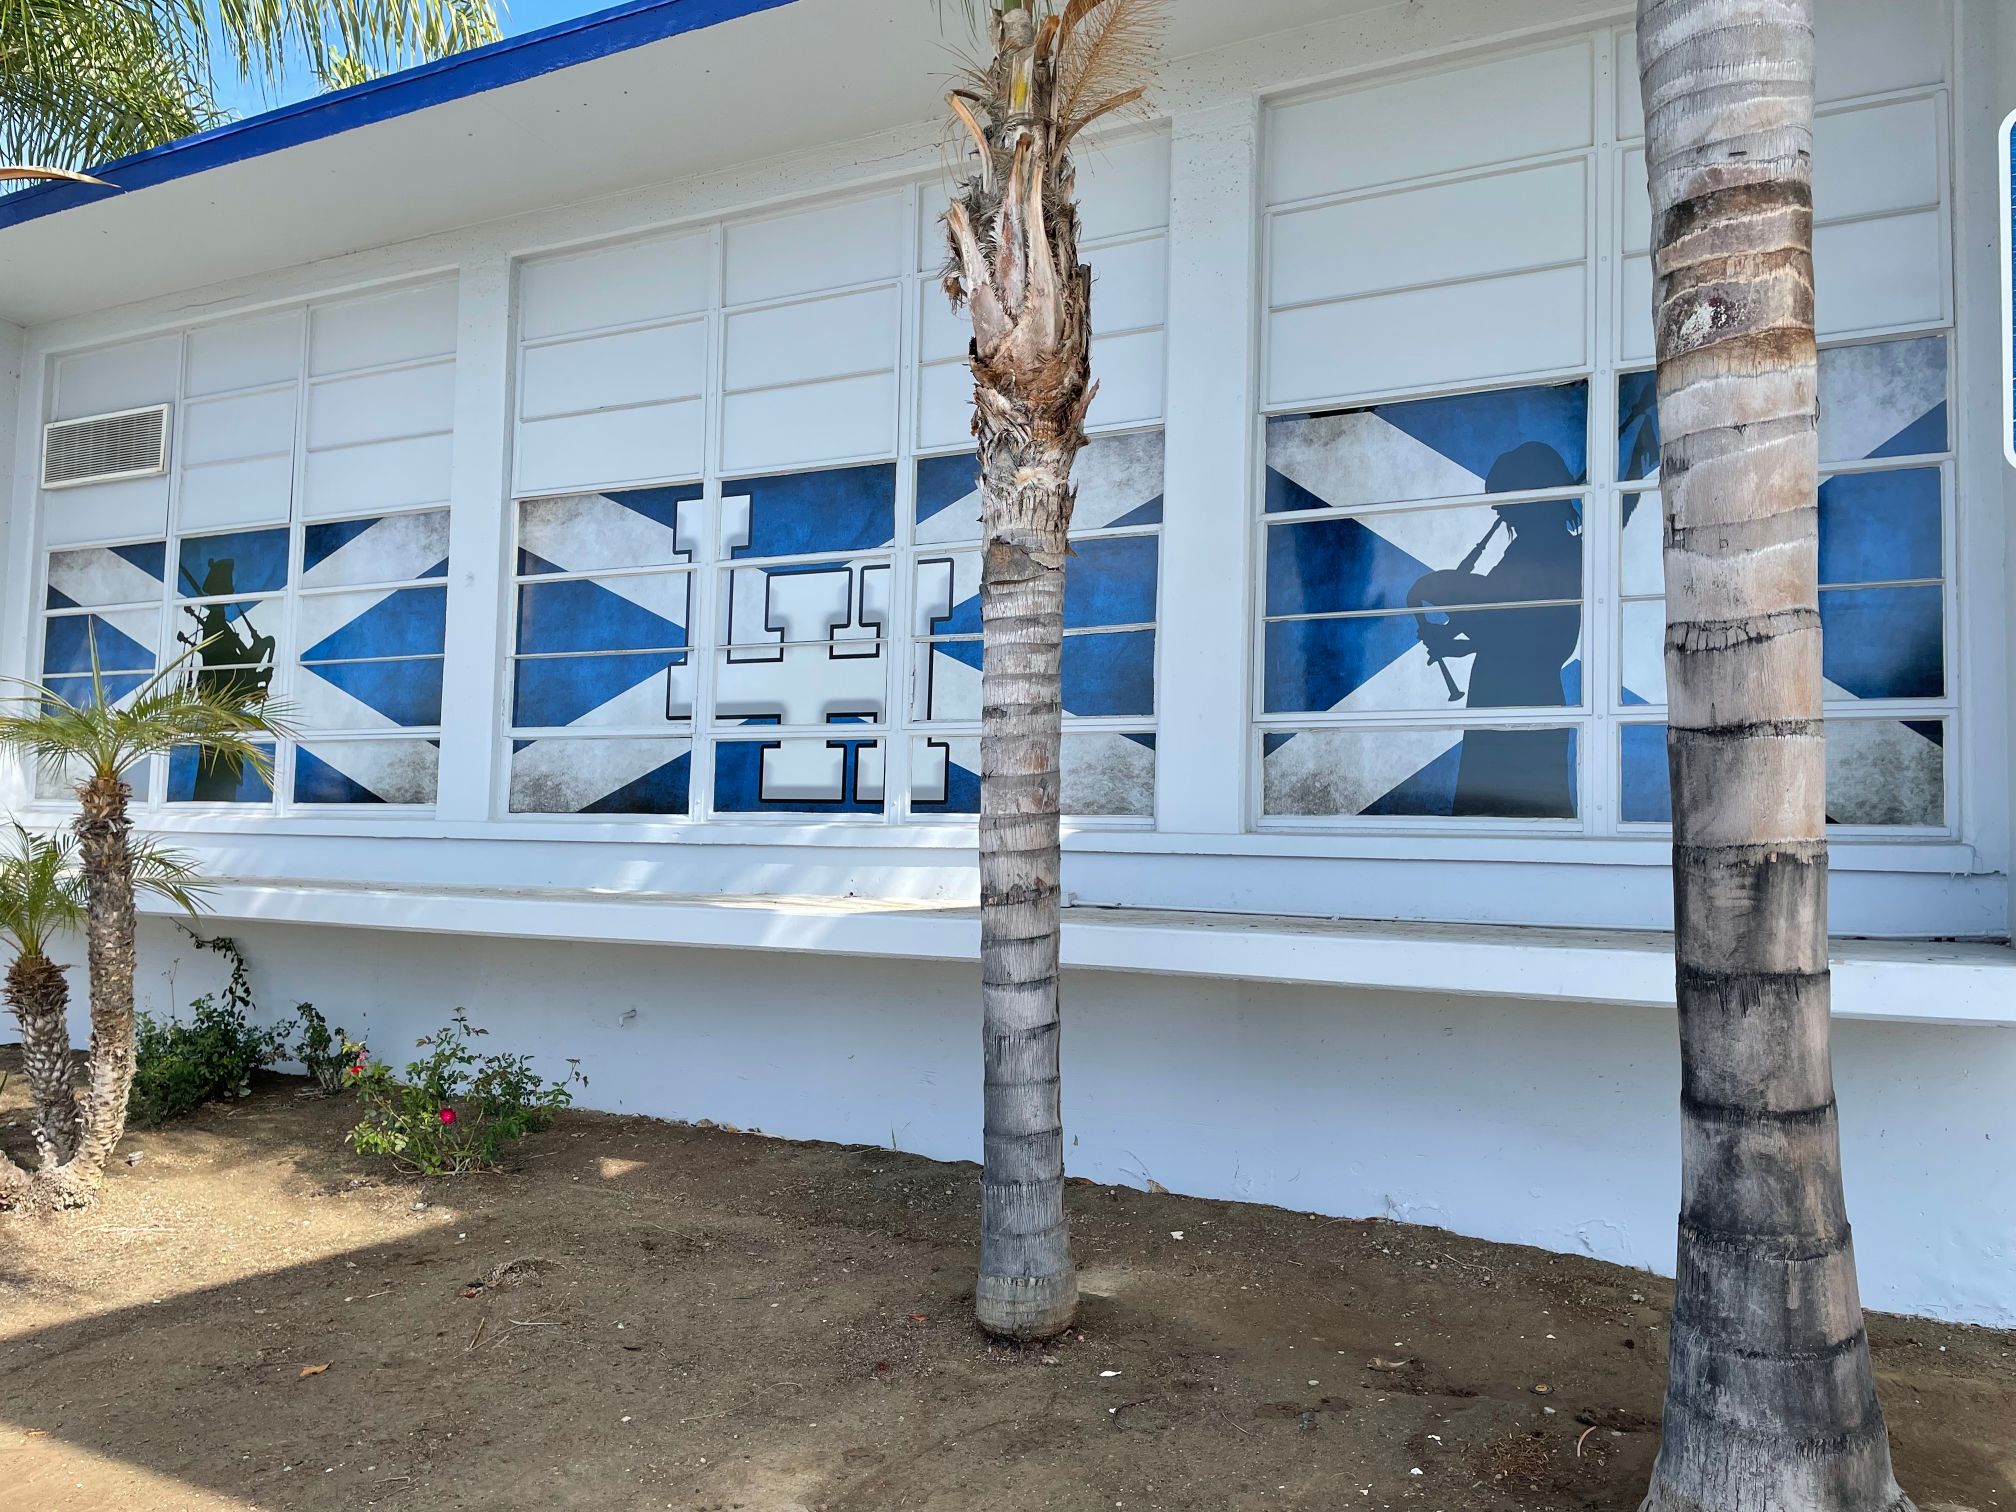 Perforated Window Graphics Welcome Visitors to La Habra High School in Orange County, CA!